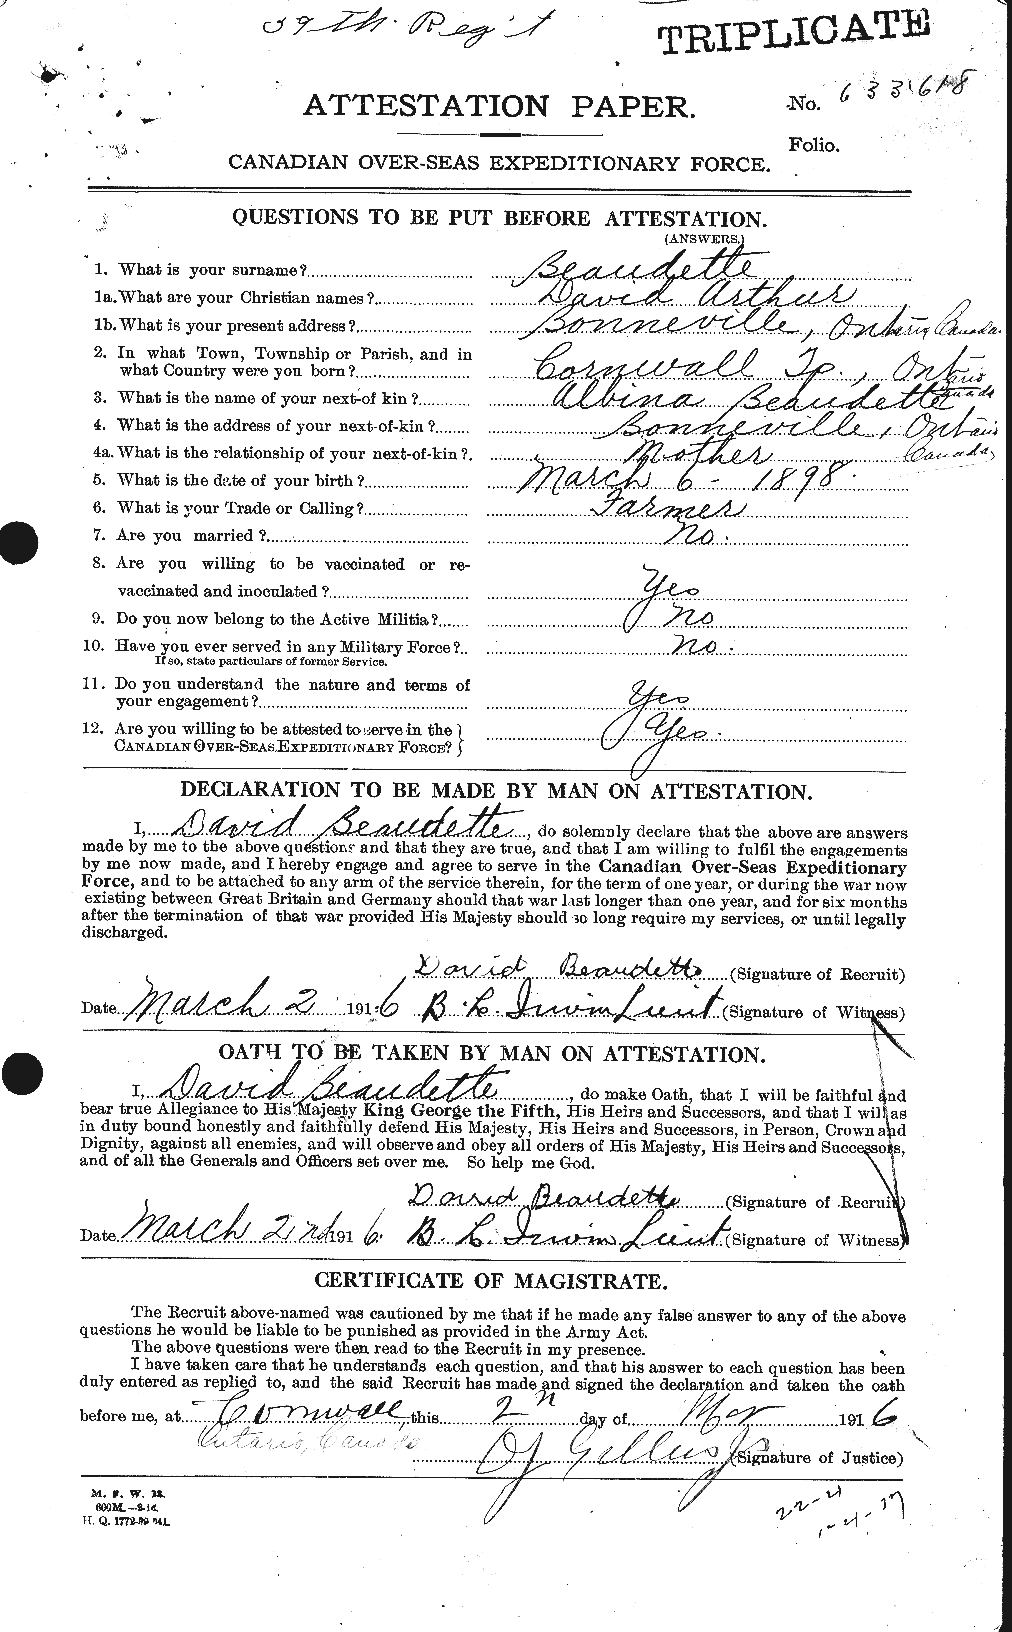 Personnel Records of the First World War - CEF 231133a